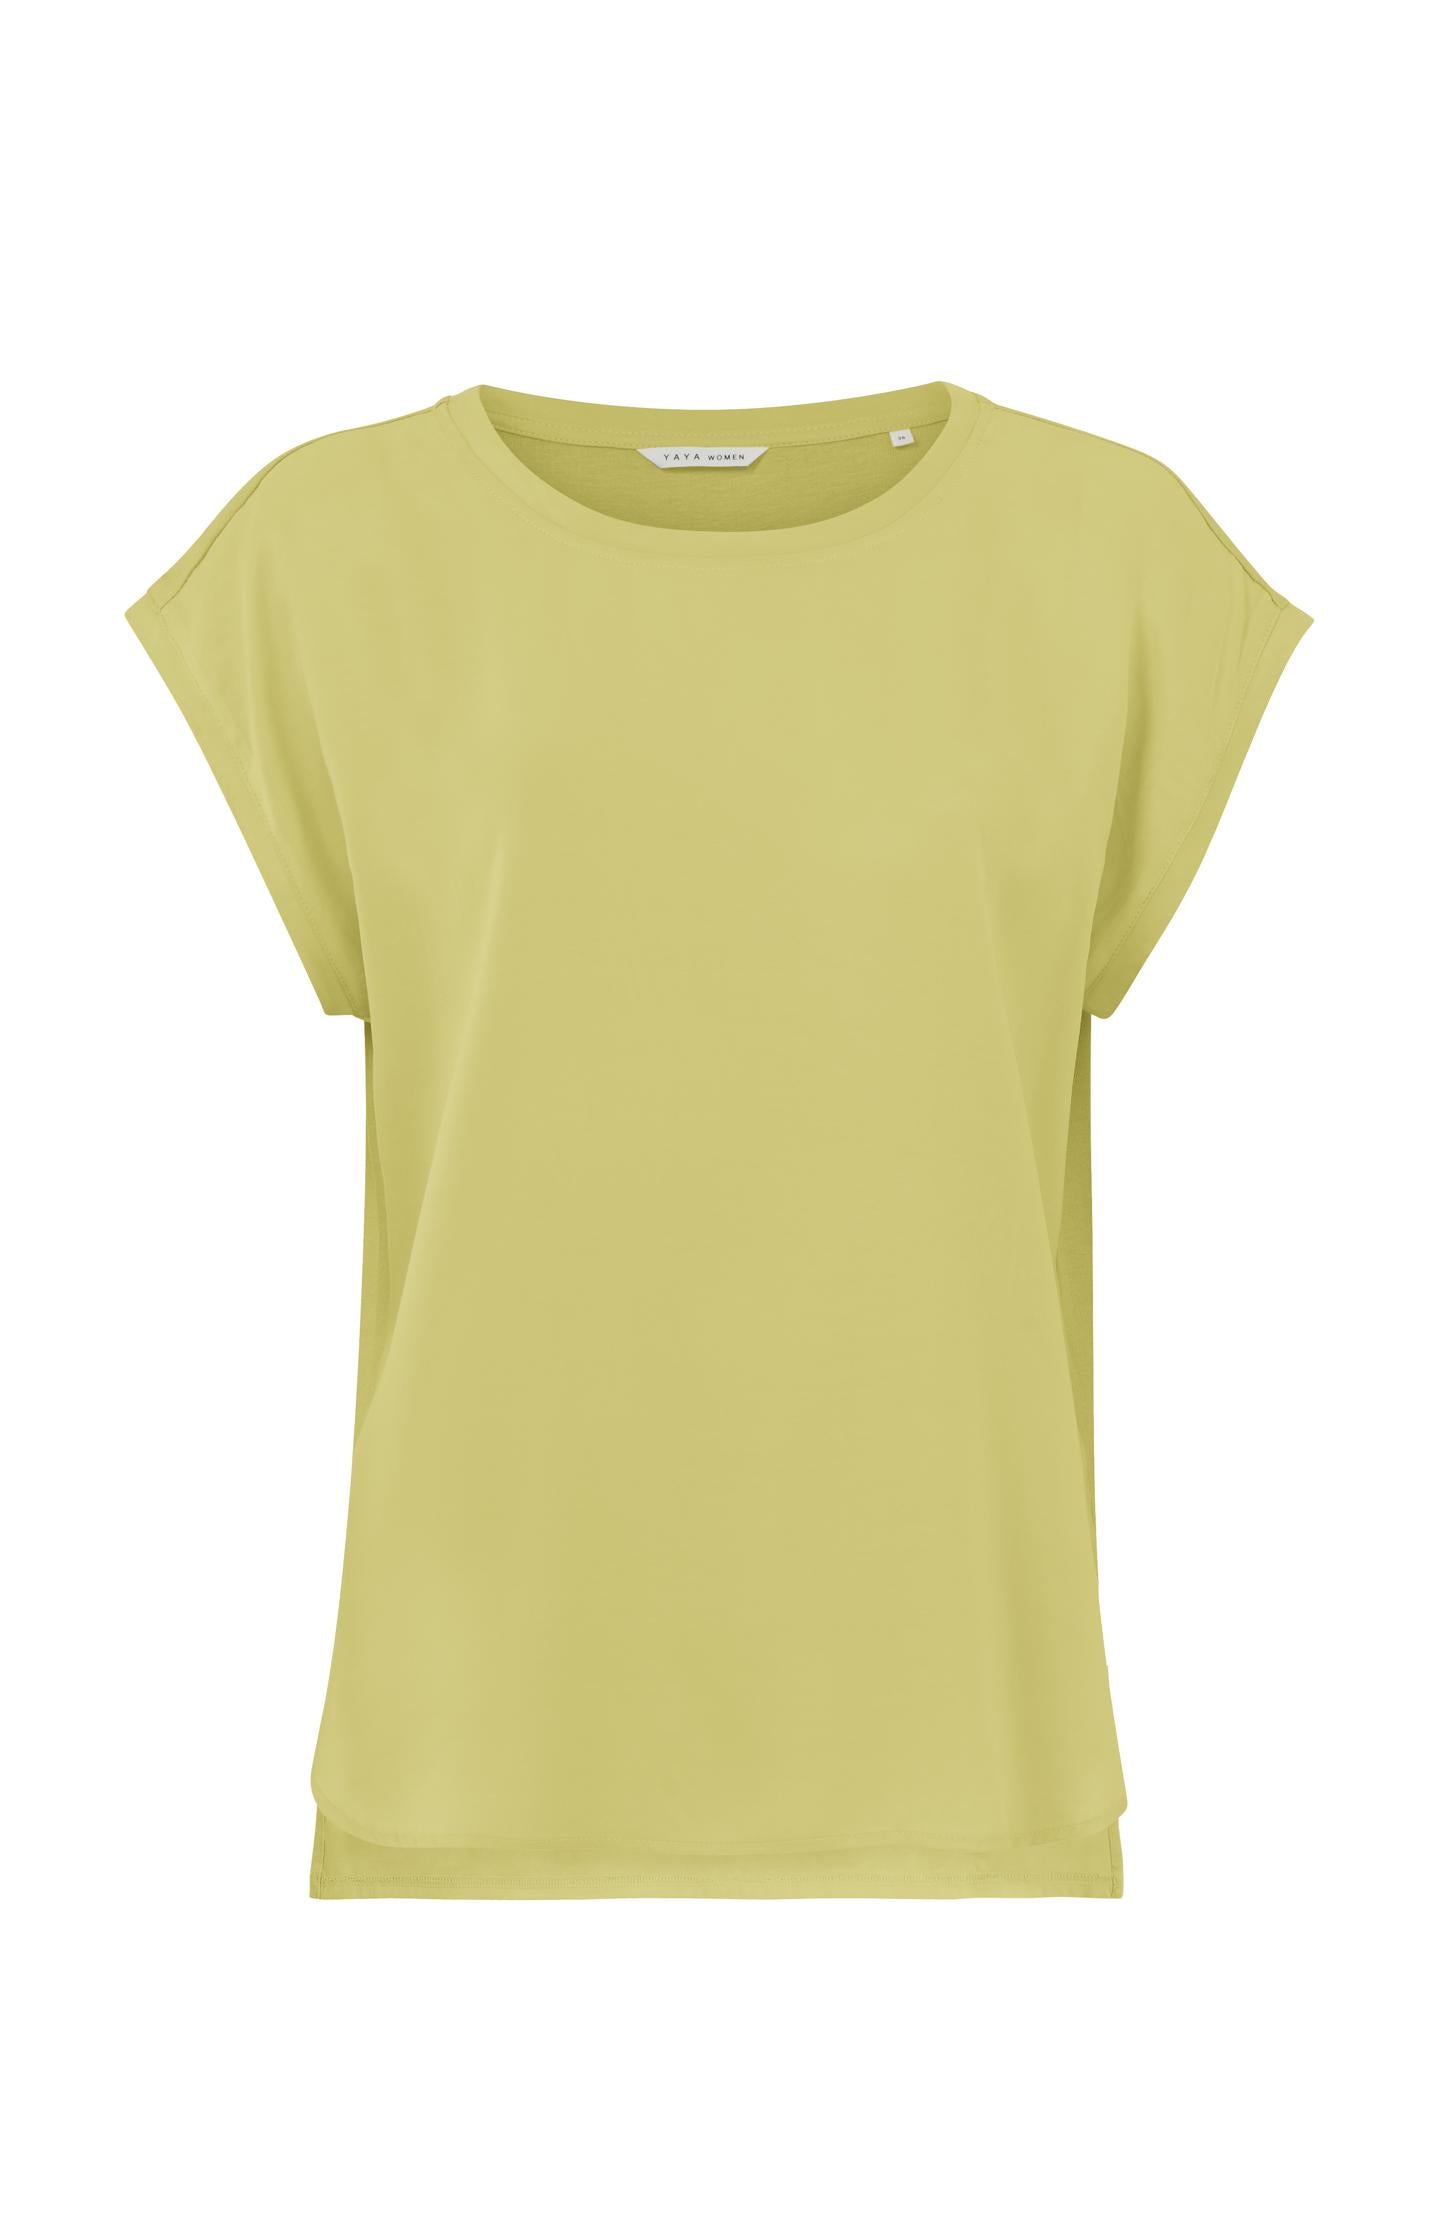 Top with round neck and cap sleeves without shoulder seams - Type: product